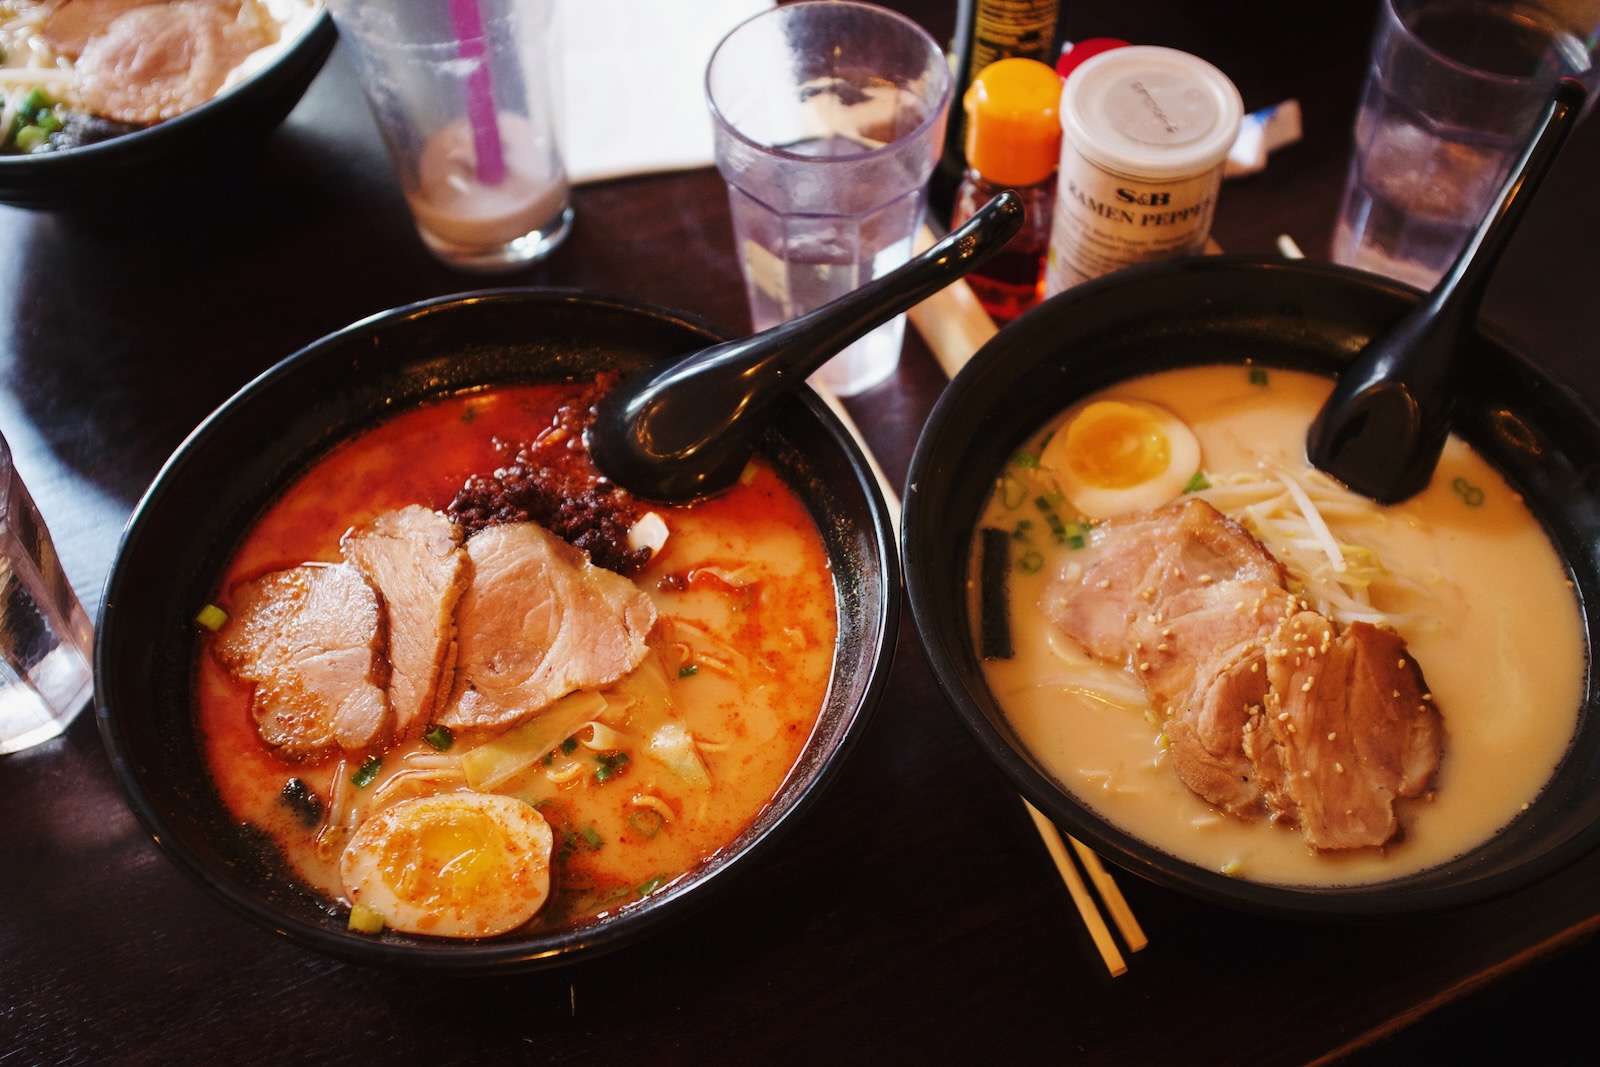 Two bowls of ramen, one of which contains a fiery red spicy broth .”